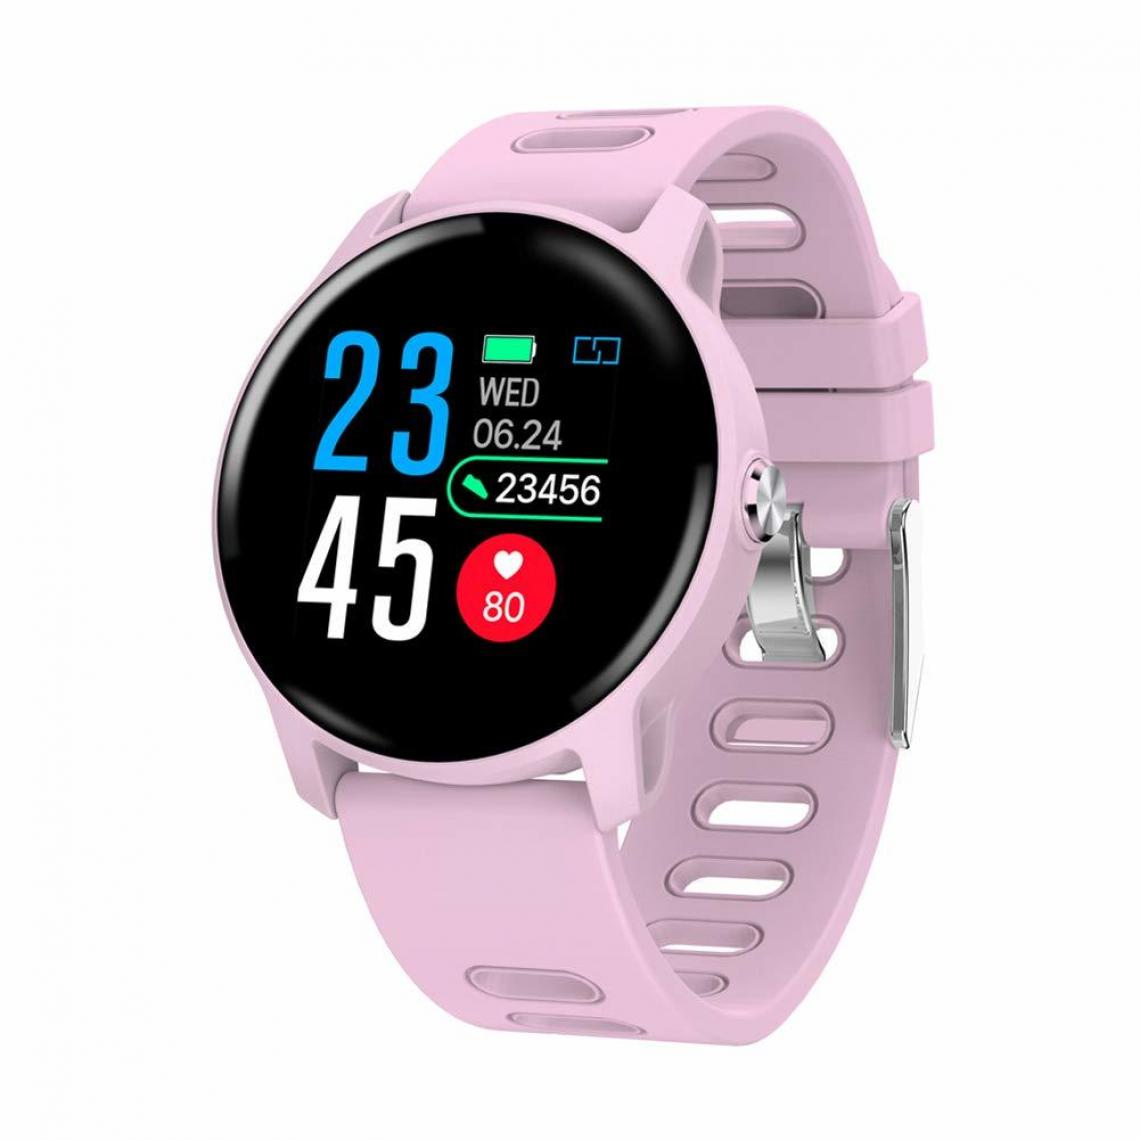 Chronotech Montres - Fitness Tracker IP68 Waterproof for Men Women, Smart Watch Blood Pressure Heart Rate Monitor Sports Smartwatch for Android IOS(Rose) - Montre connectée